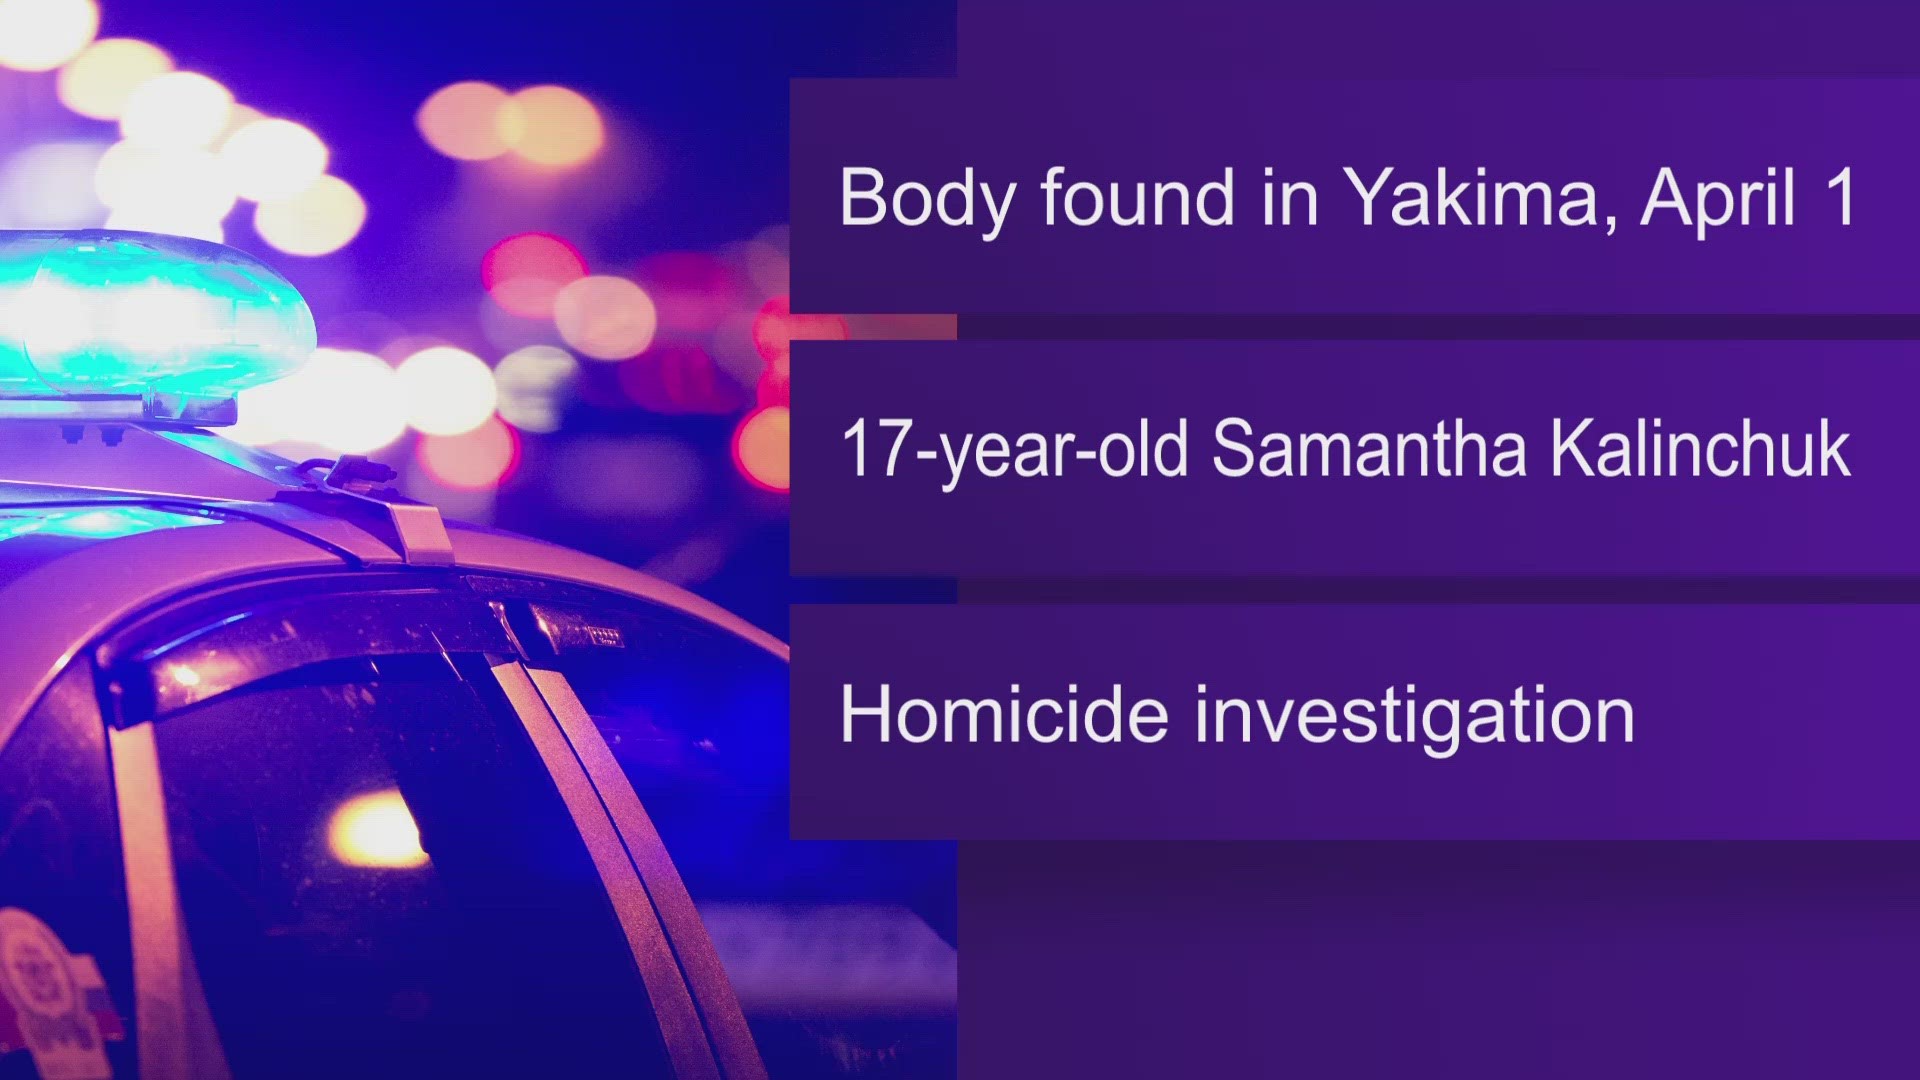 According to the Yakima County Sheriff's Office, Samantha Kalinchuck's death is being investigated as a homicide.